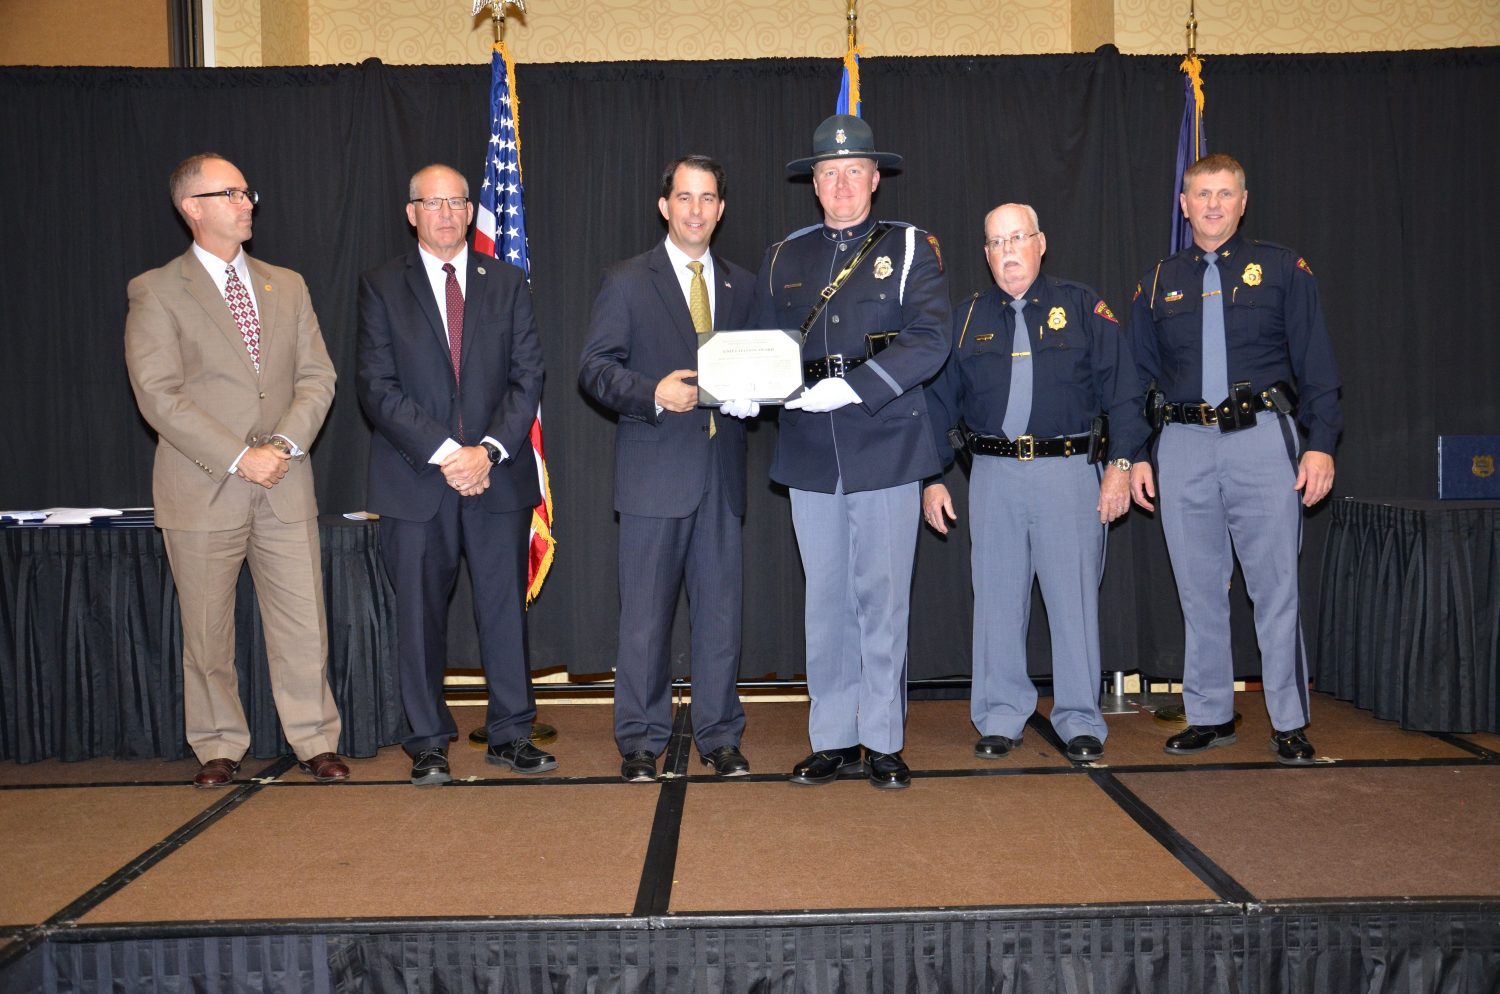 Wisconsin State Patrol presents awards for heroism, lifesaving actions and exceptional service